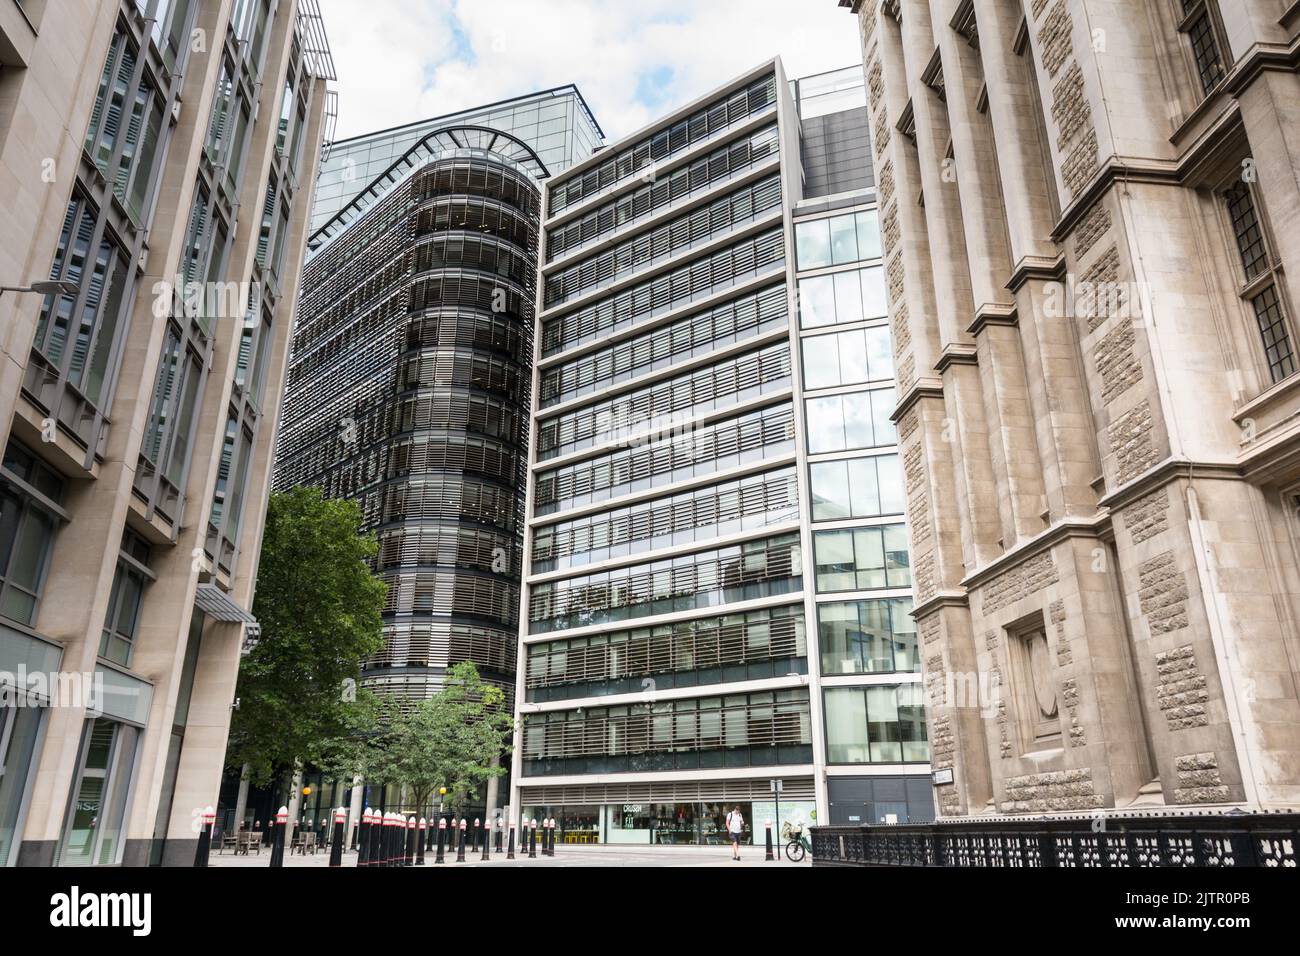 Taylor Wessing UK head office at 5 New Street Square, City of London, England, UK Stock Photo